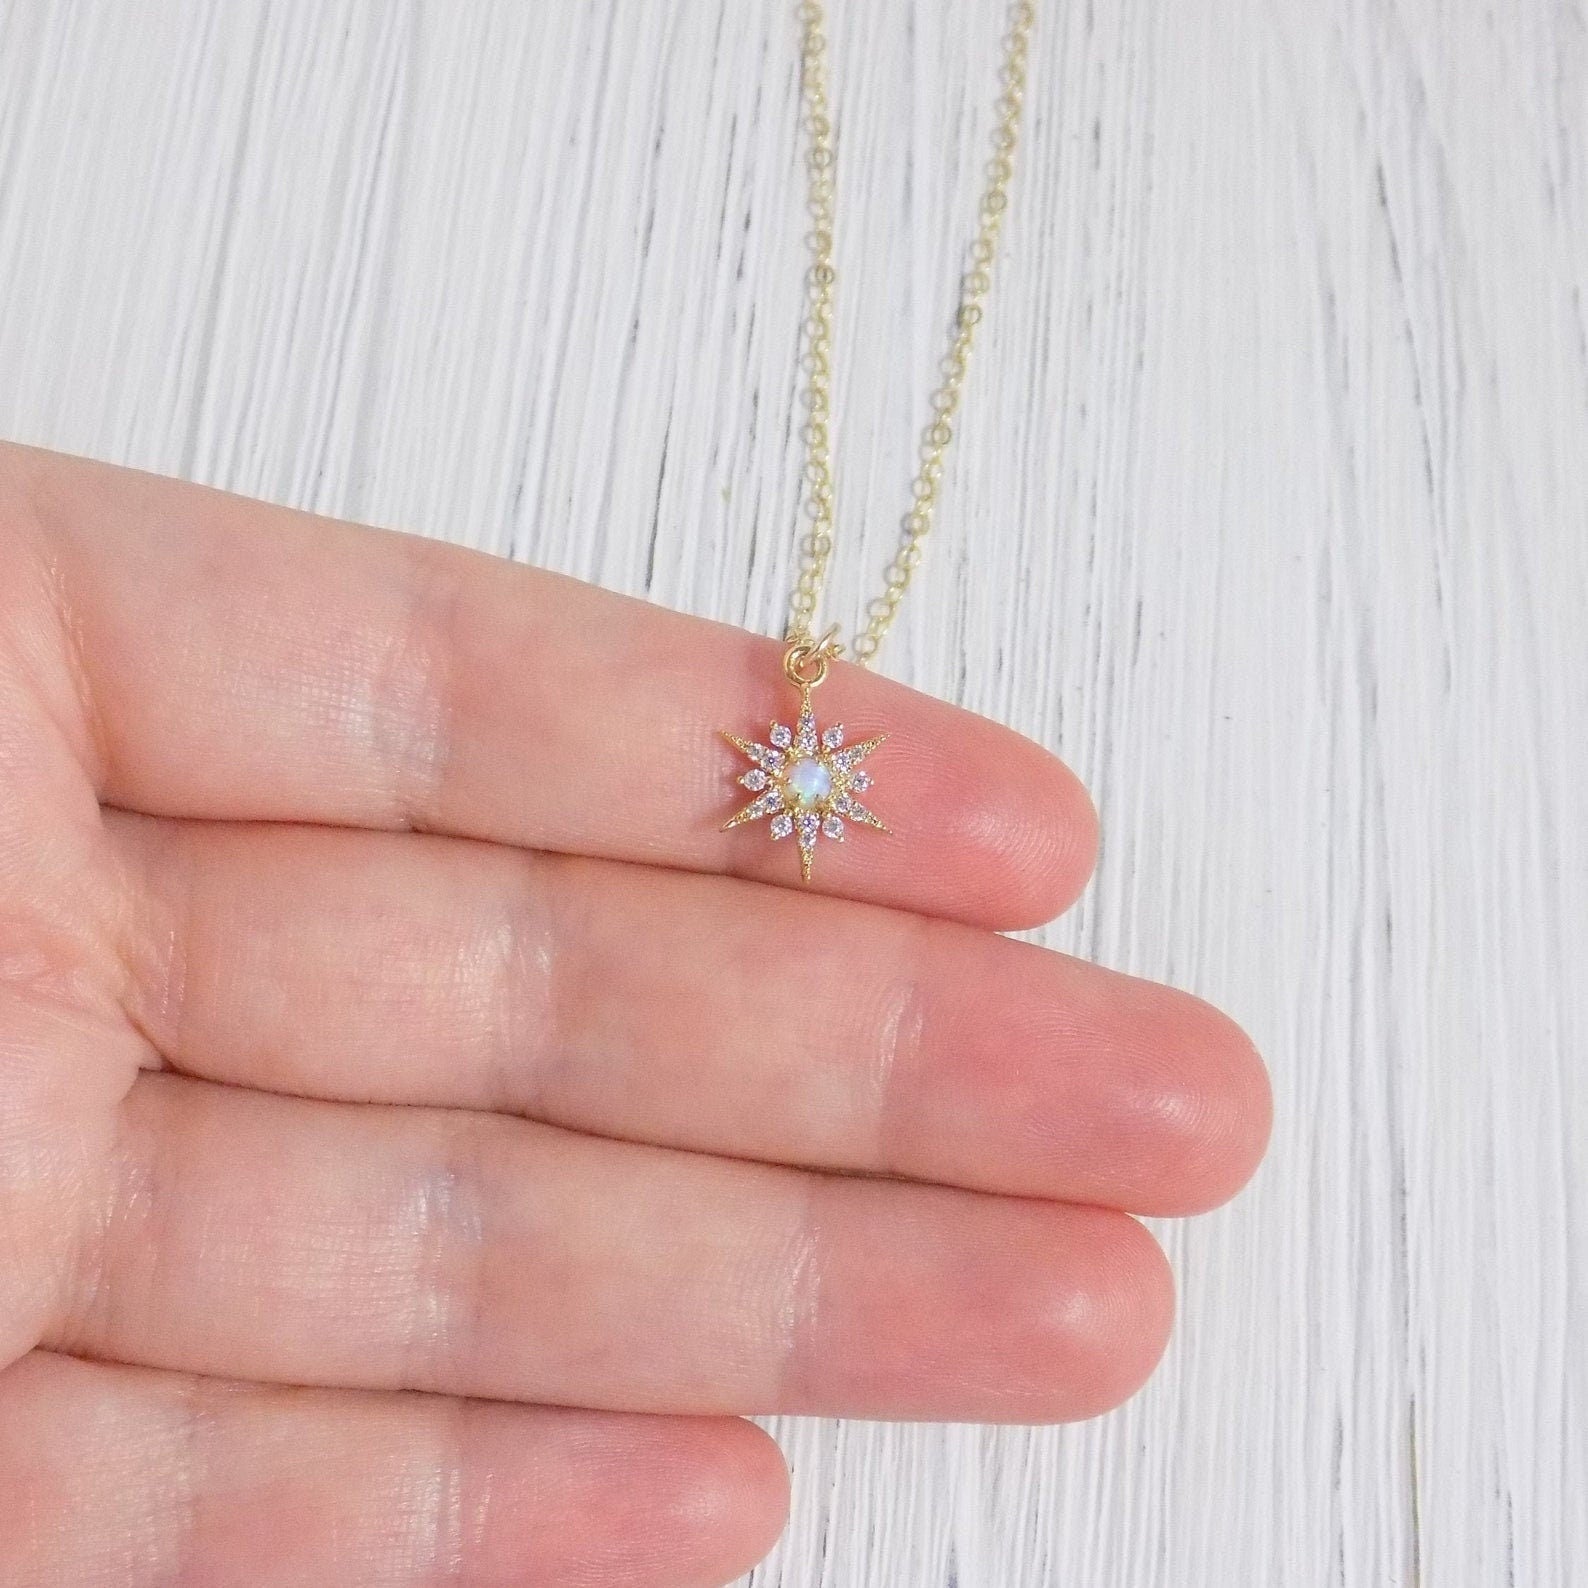 Gold Opal Star Burst Necklace - Layering Necklace - October Birthday Gift Woman